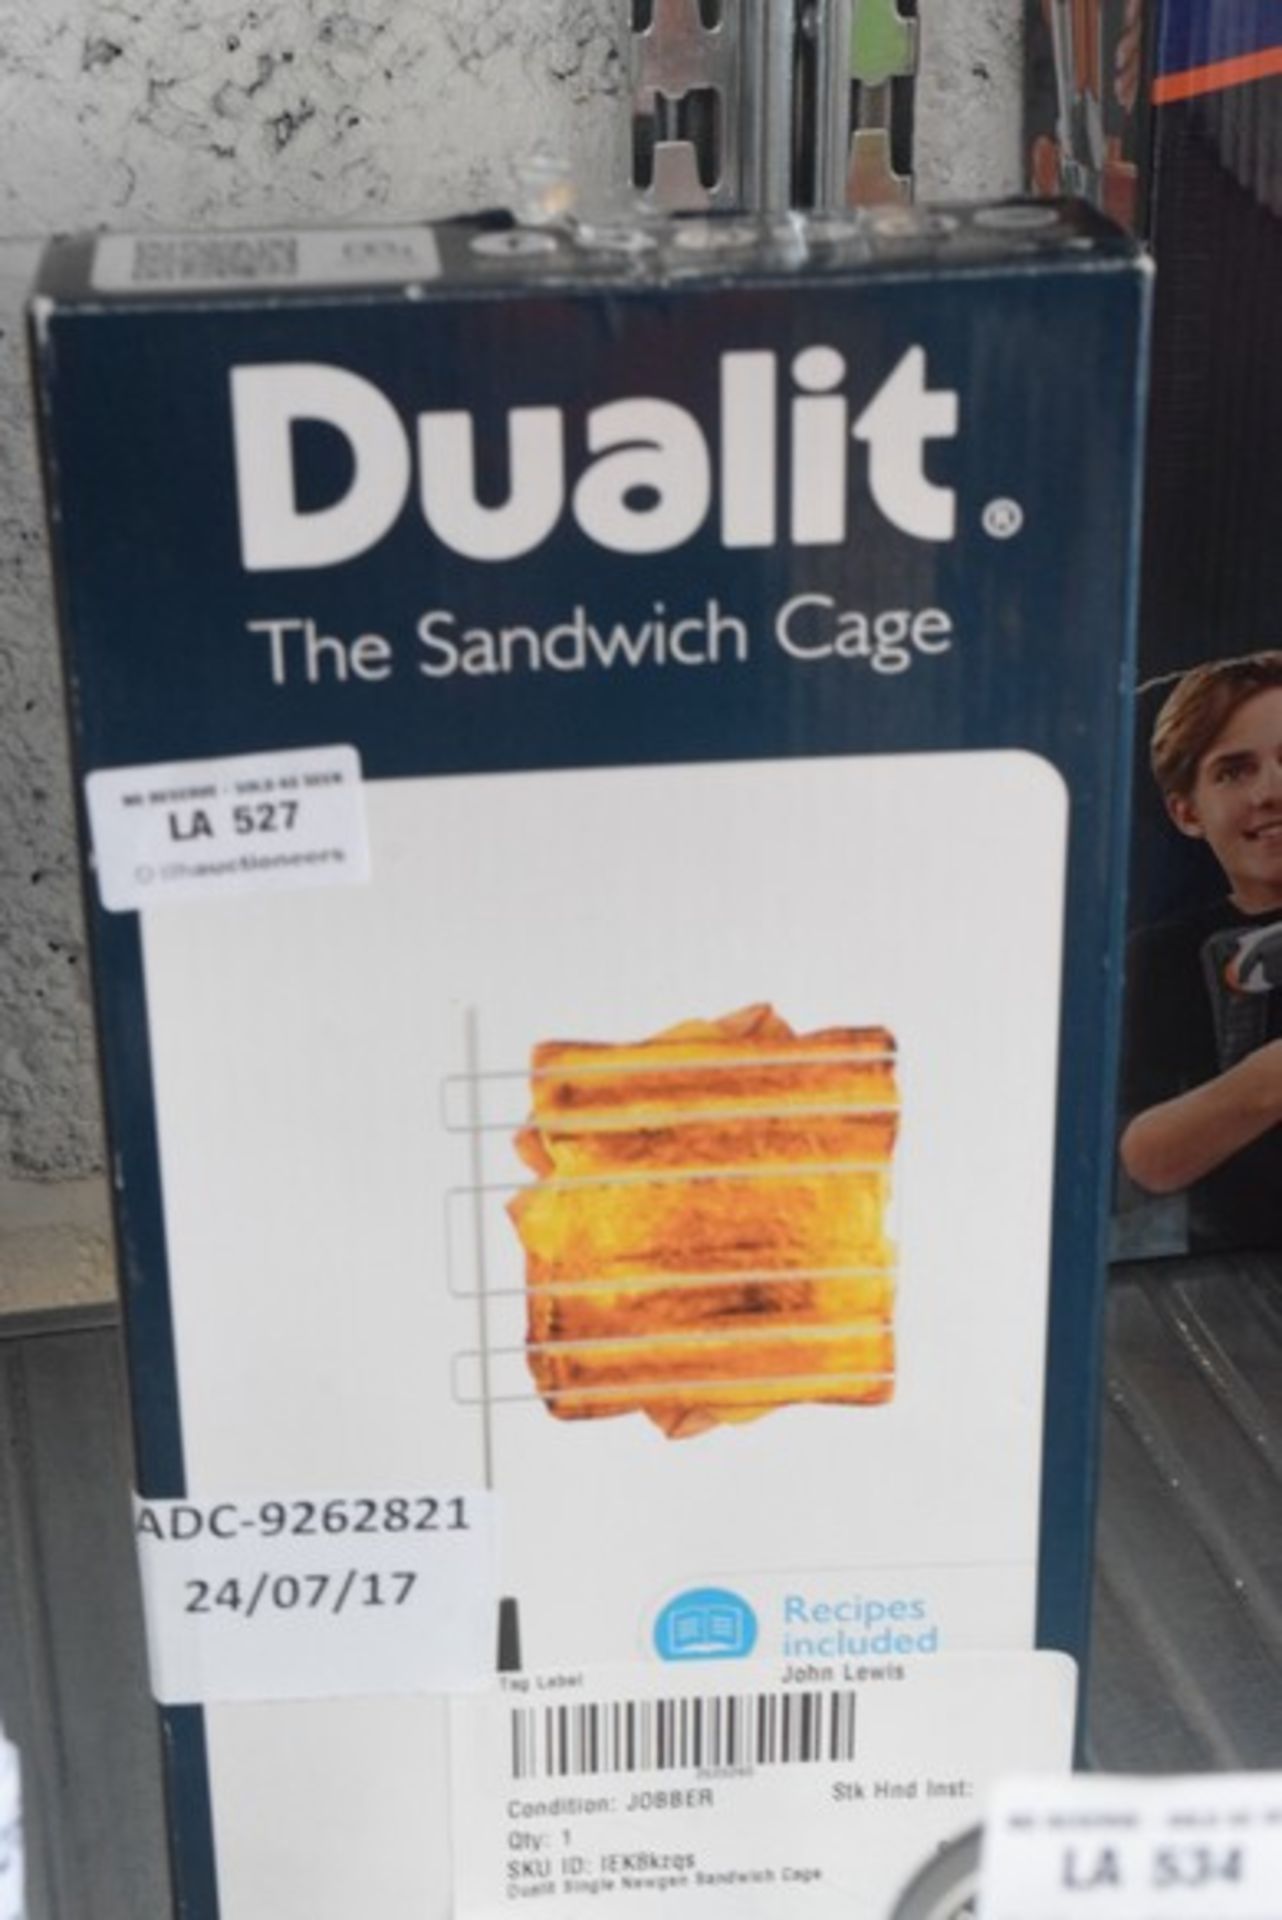 1 x DUALIT SINGLE NEW GENT SANDWICH CAGE RRP £15 24.07.17 *PLEASE NOTE THAT THE BID PRICE IS